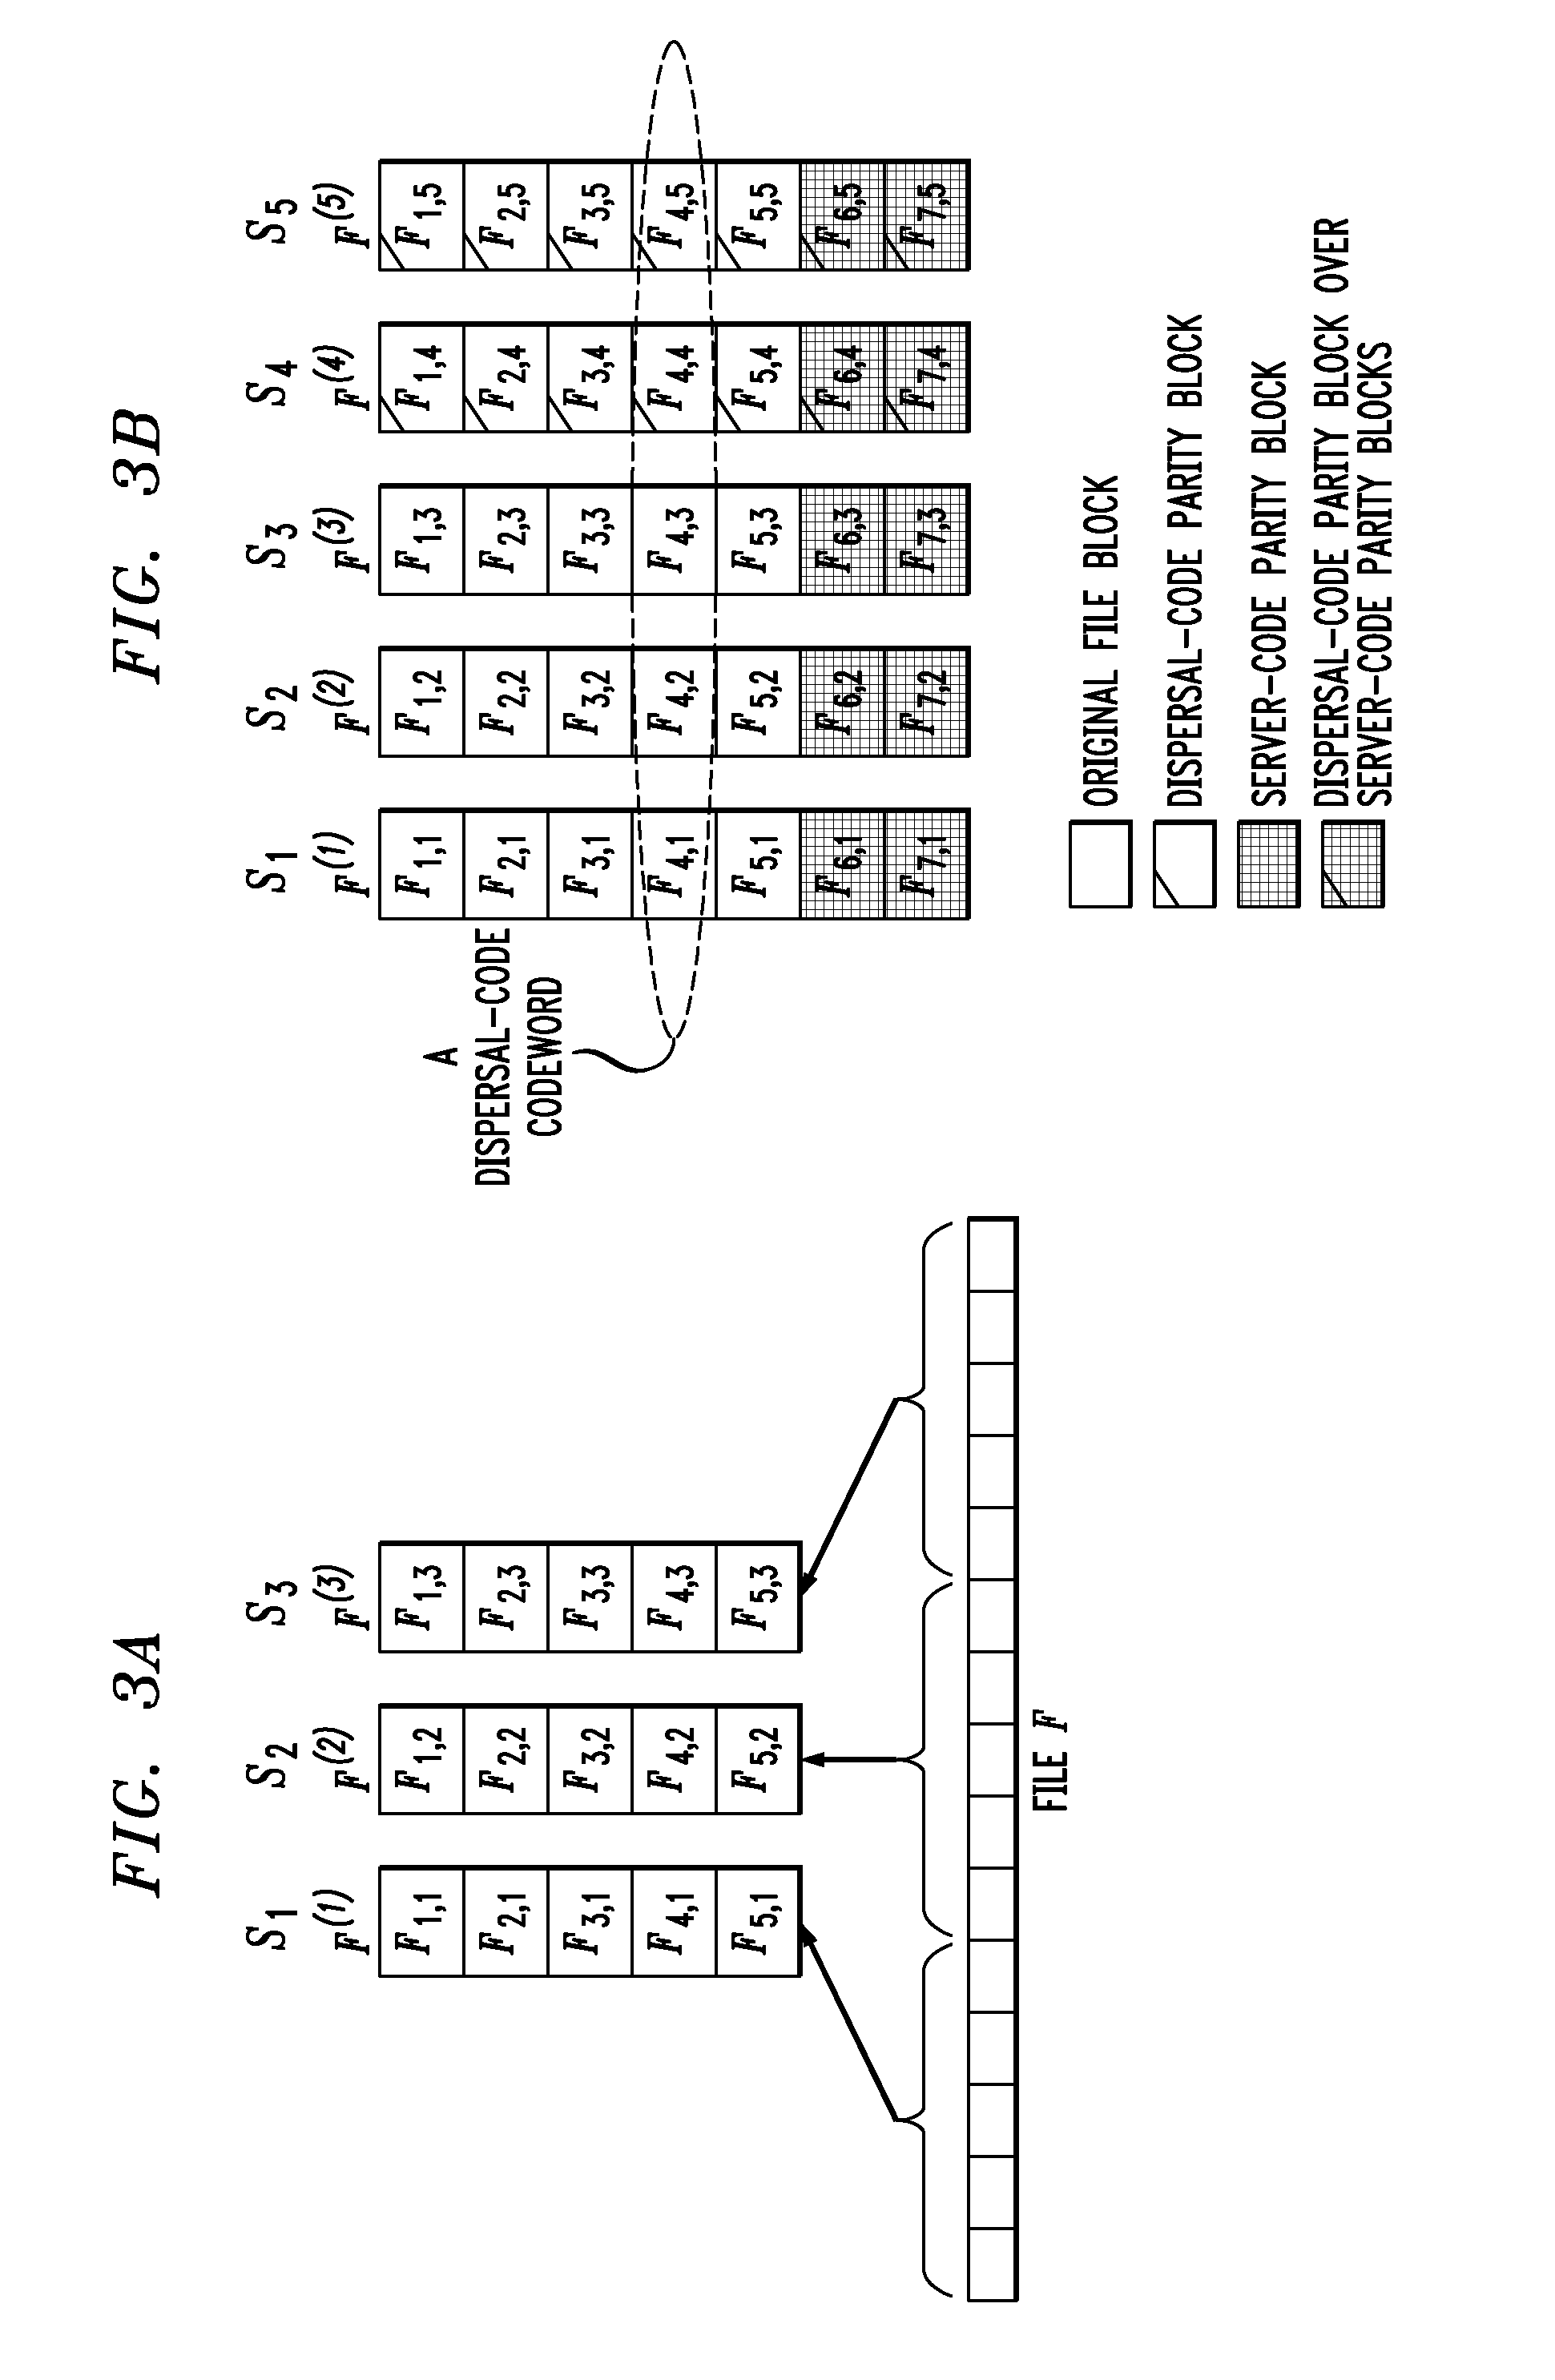 Distributed storage system with efficient handling of file updates